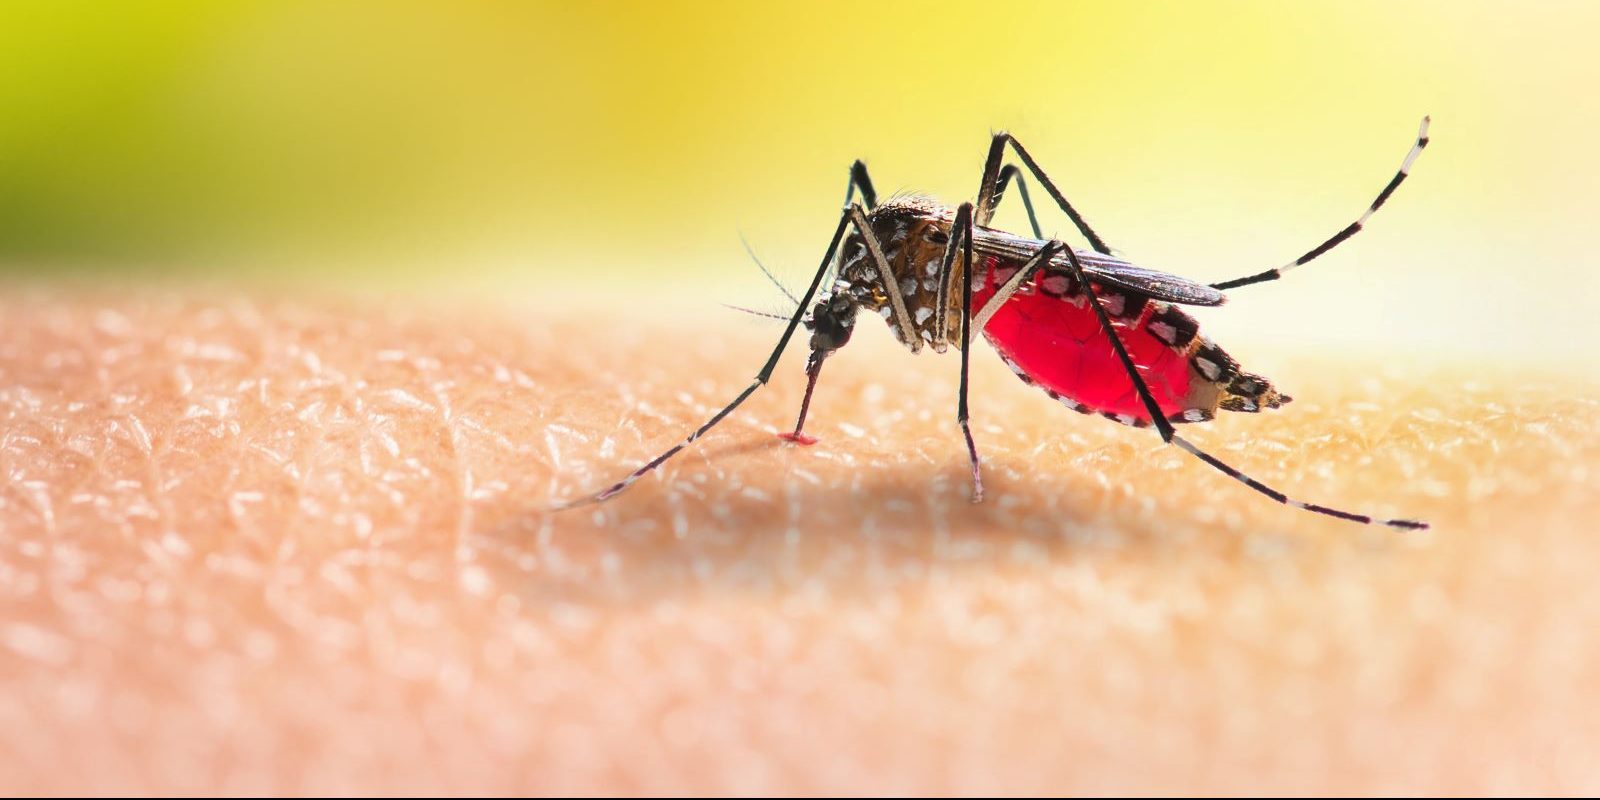 Mosquitoes carrying West Nile virus have been found in CT.